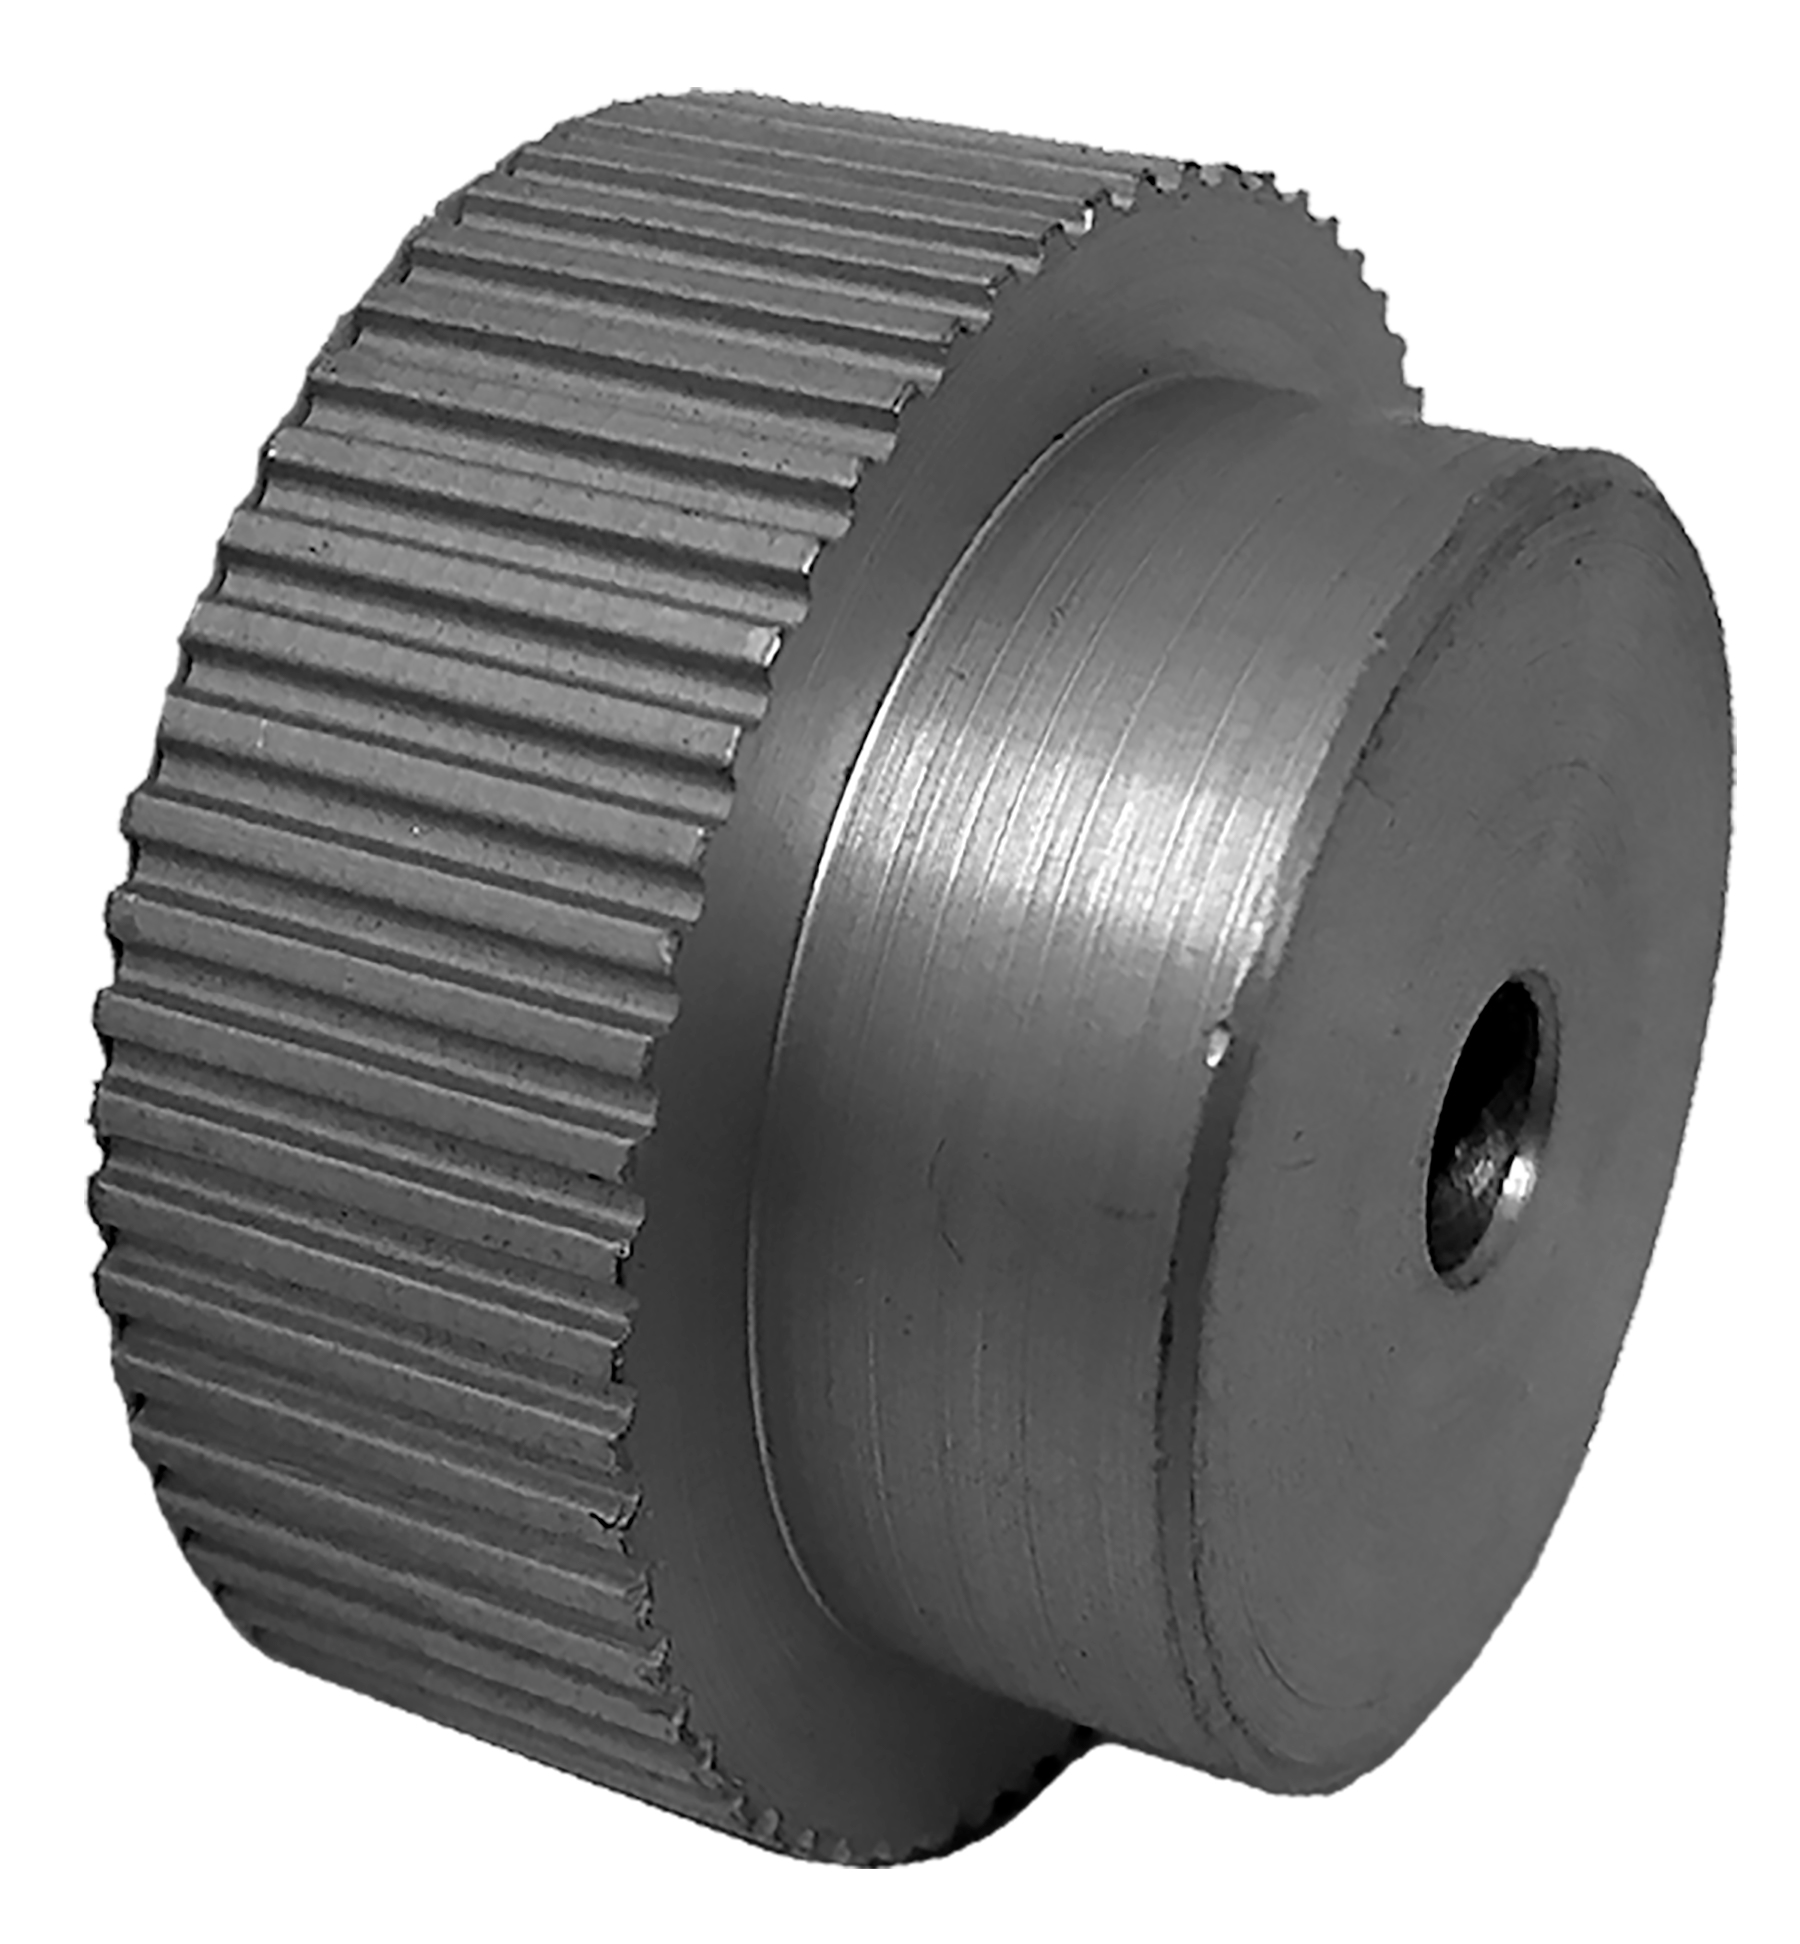 60MP037-6A3 - Aluminum Imperial Pitch Pulleys